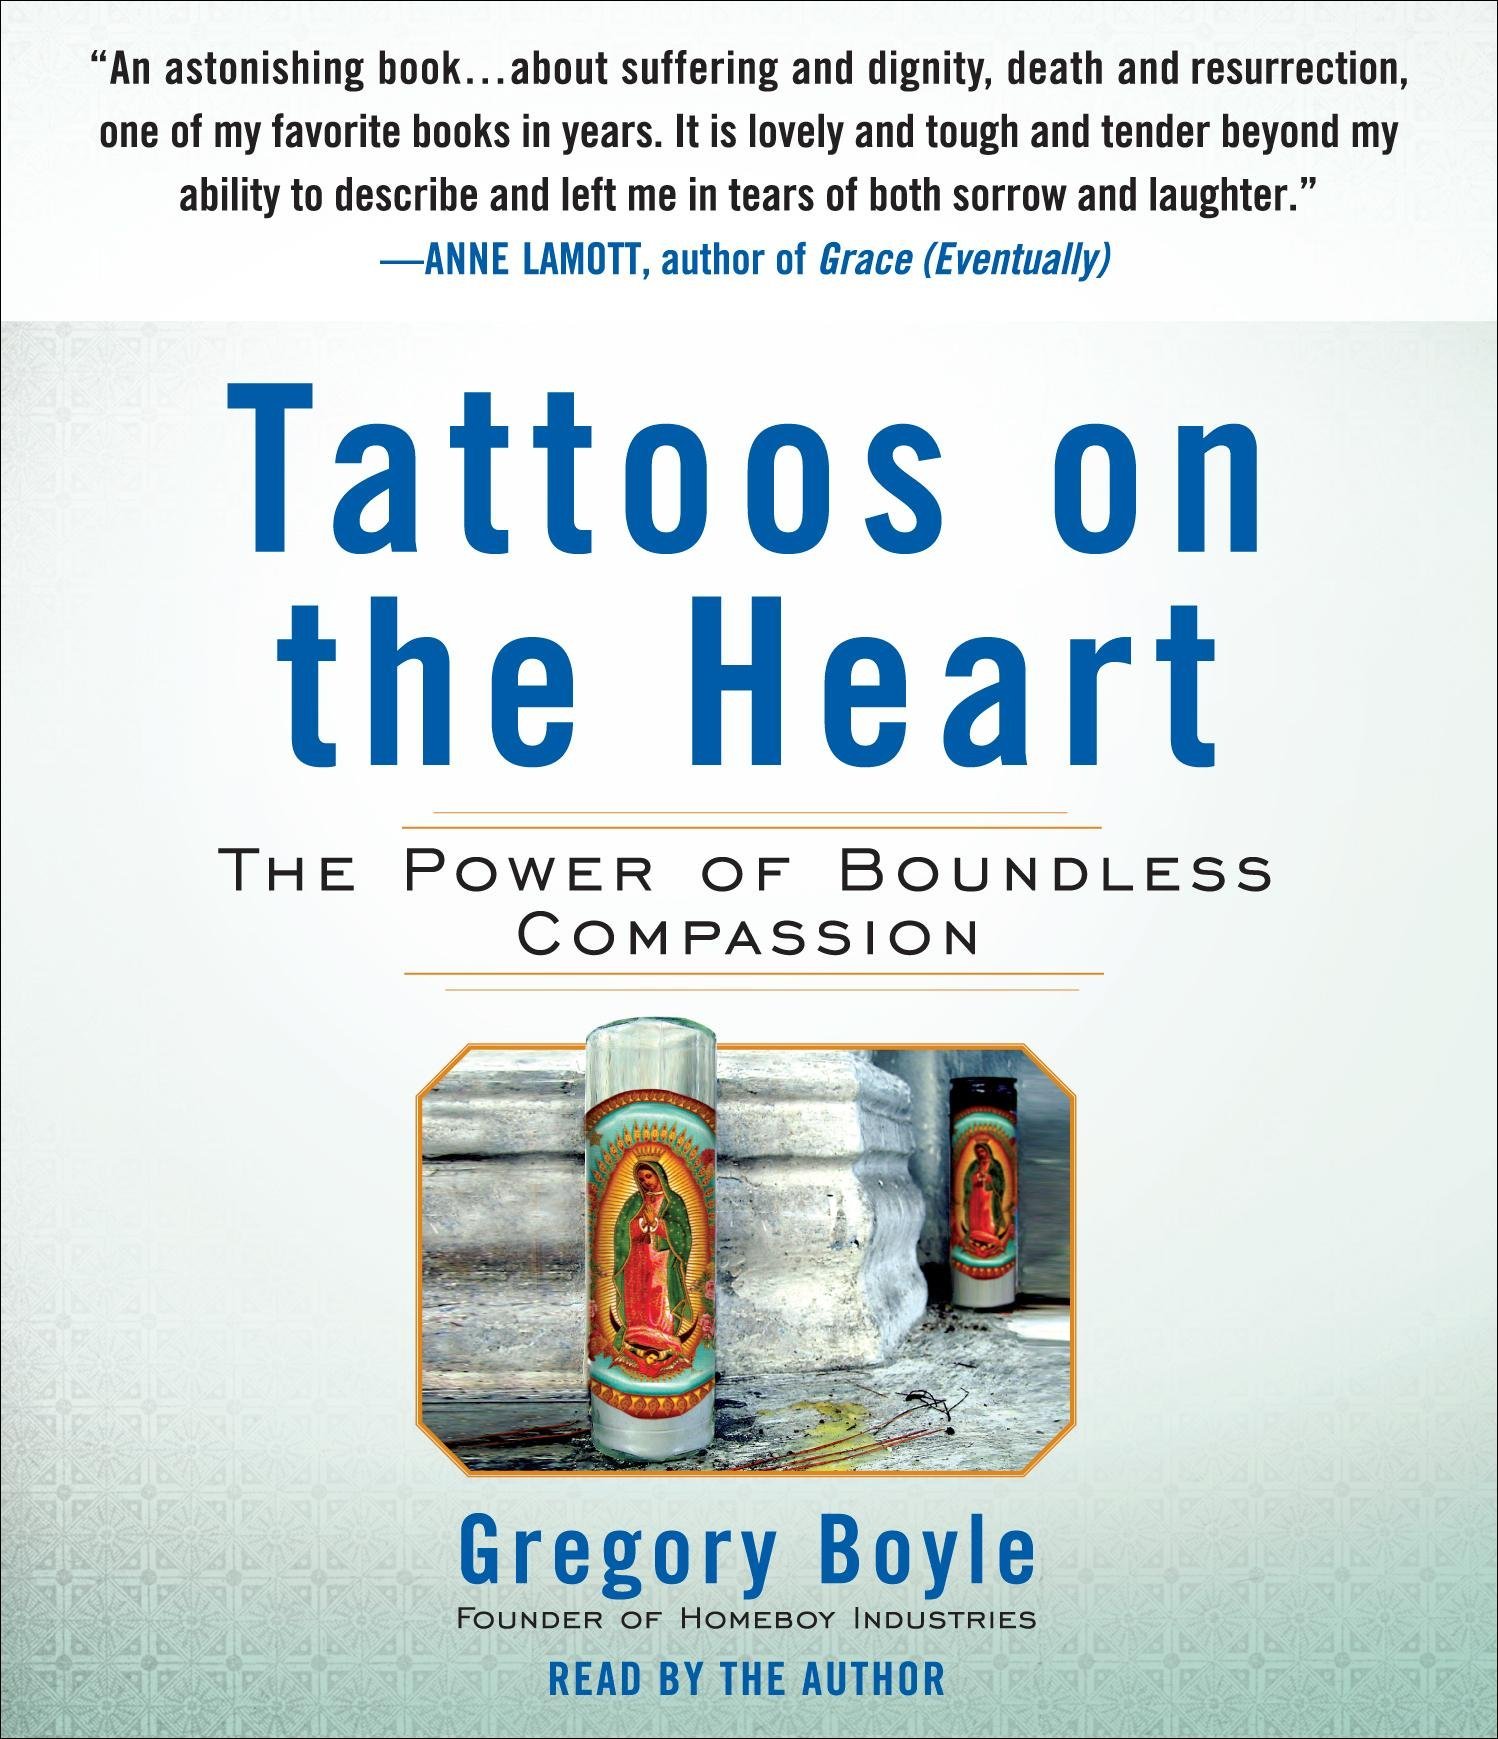 Tattoos on the Heart, Father Gregory Boyle